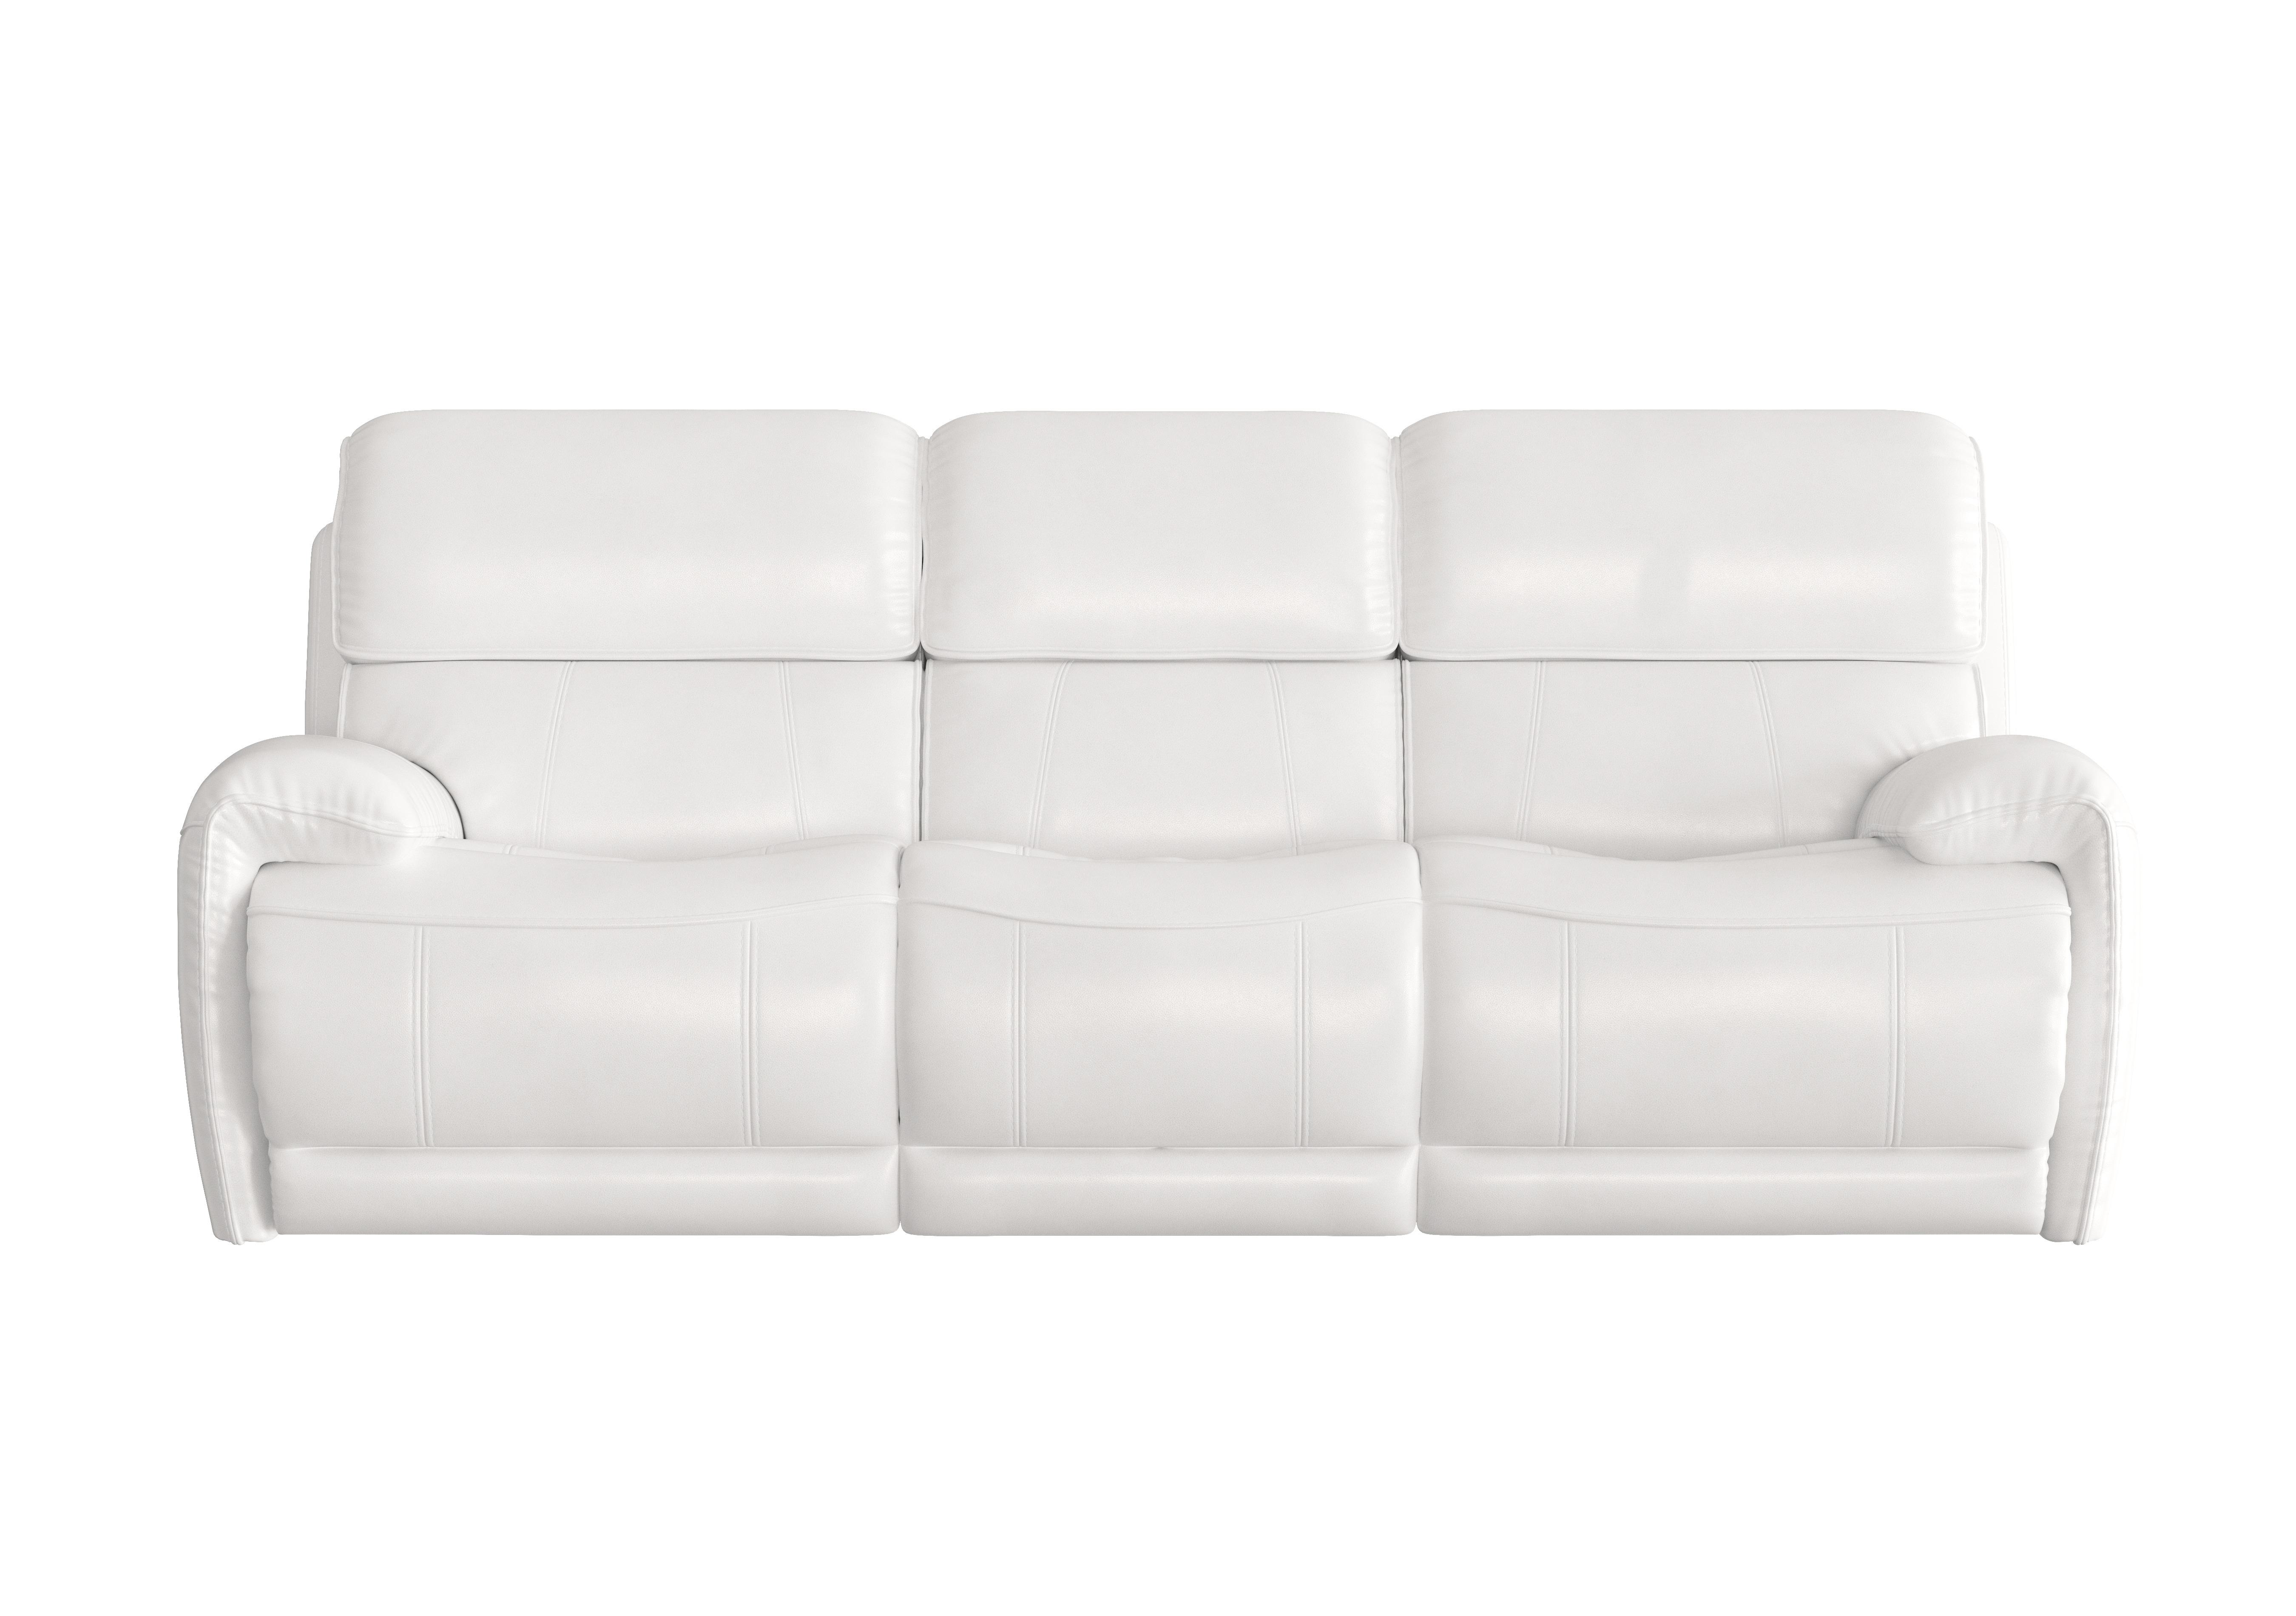 Link 3 Seater Leather Power Recliner Sofa with Power Headrests in Bv-744d Star White on Furniture Village